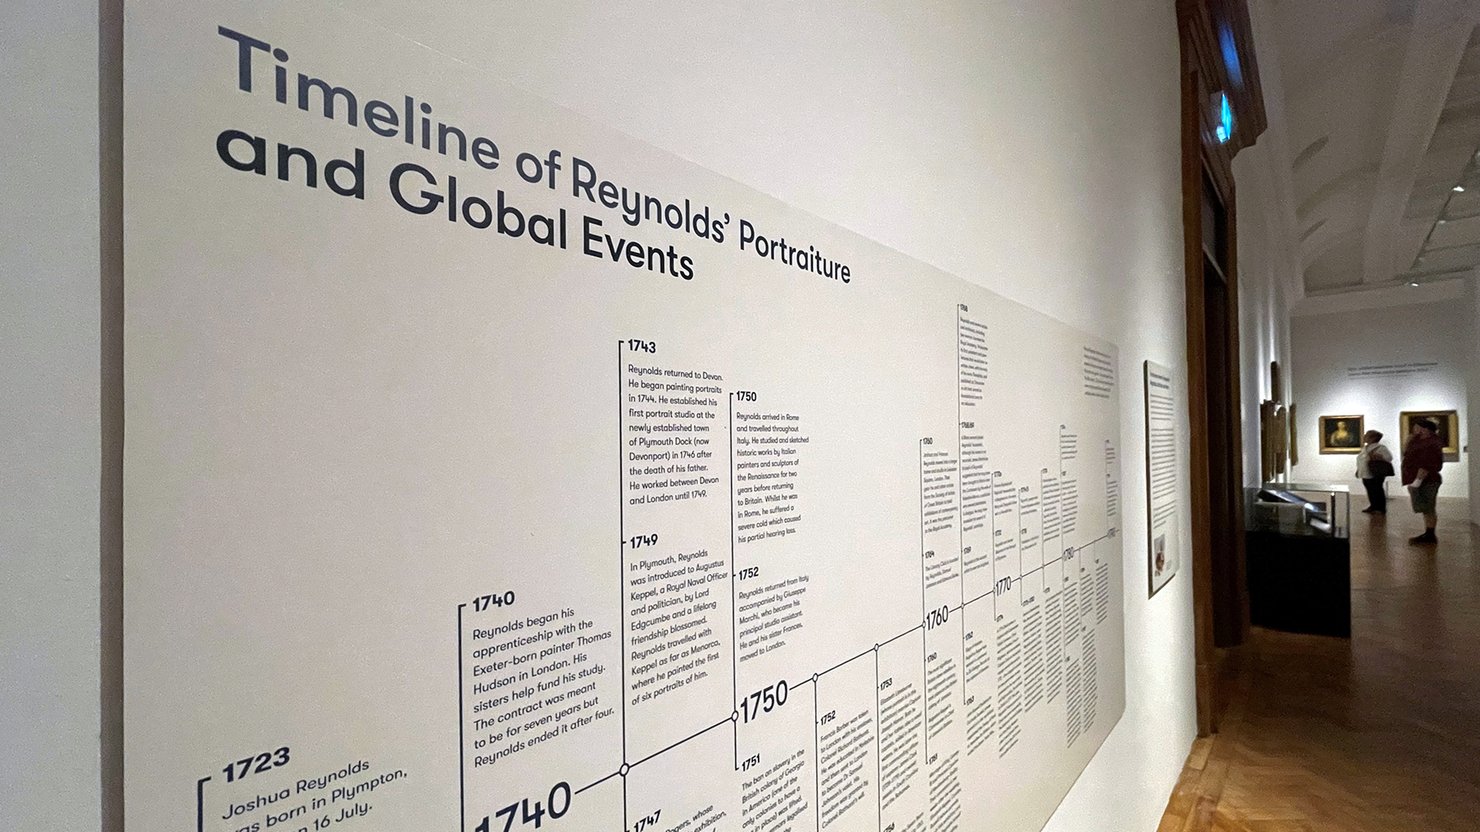 Graphic in an exhibition showing a timeline of events connected to Sir Joshua Reynolds